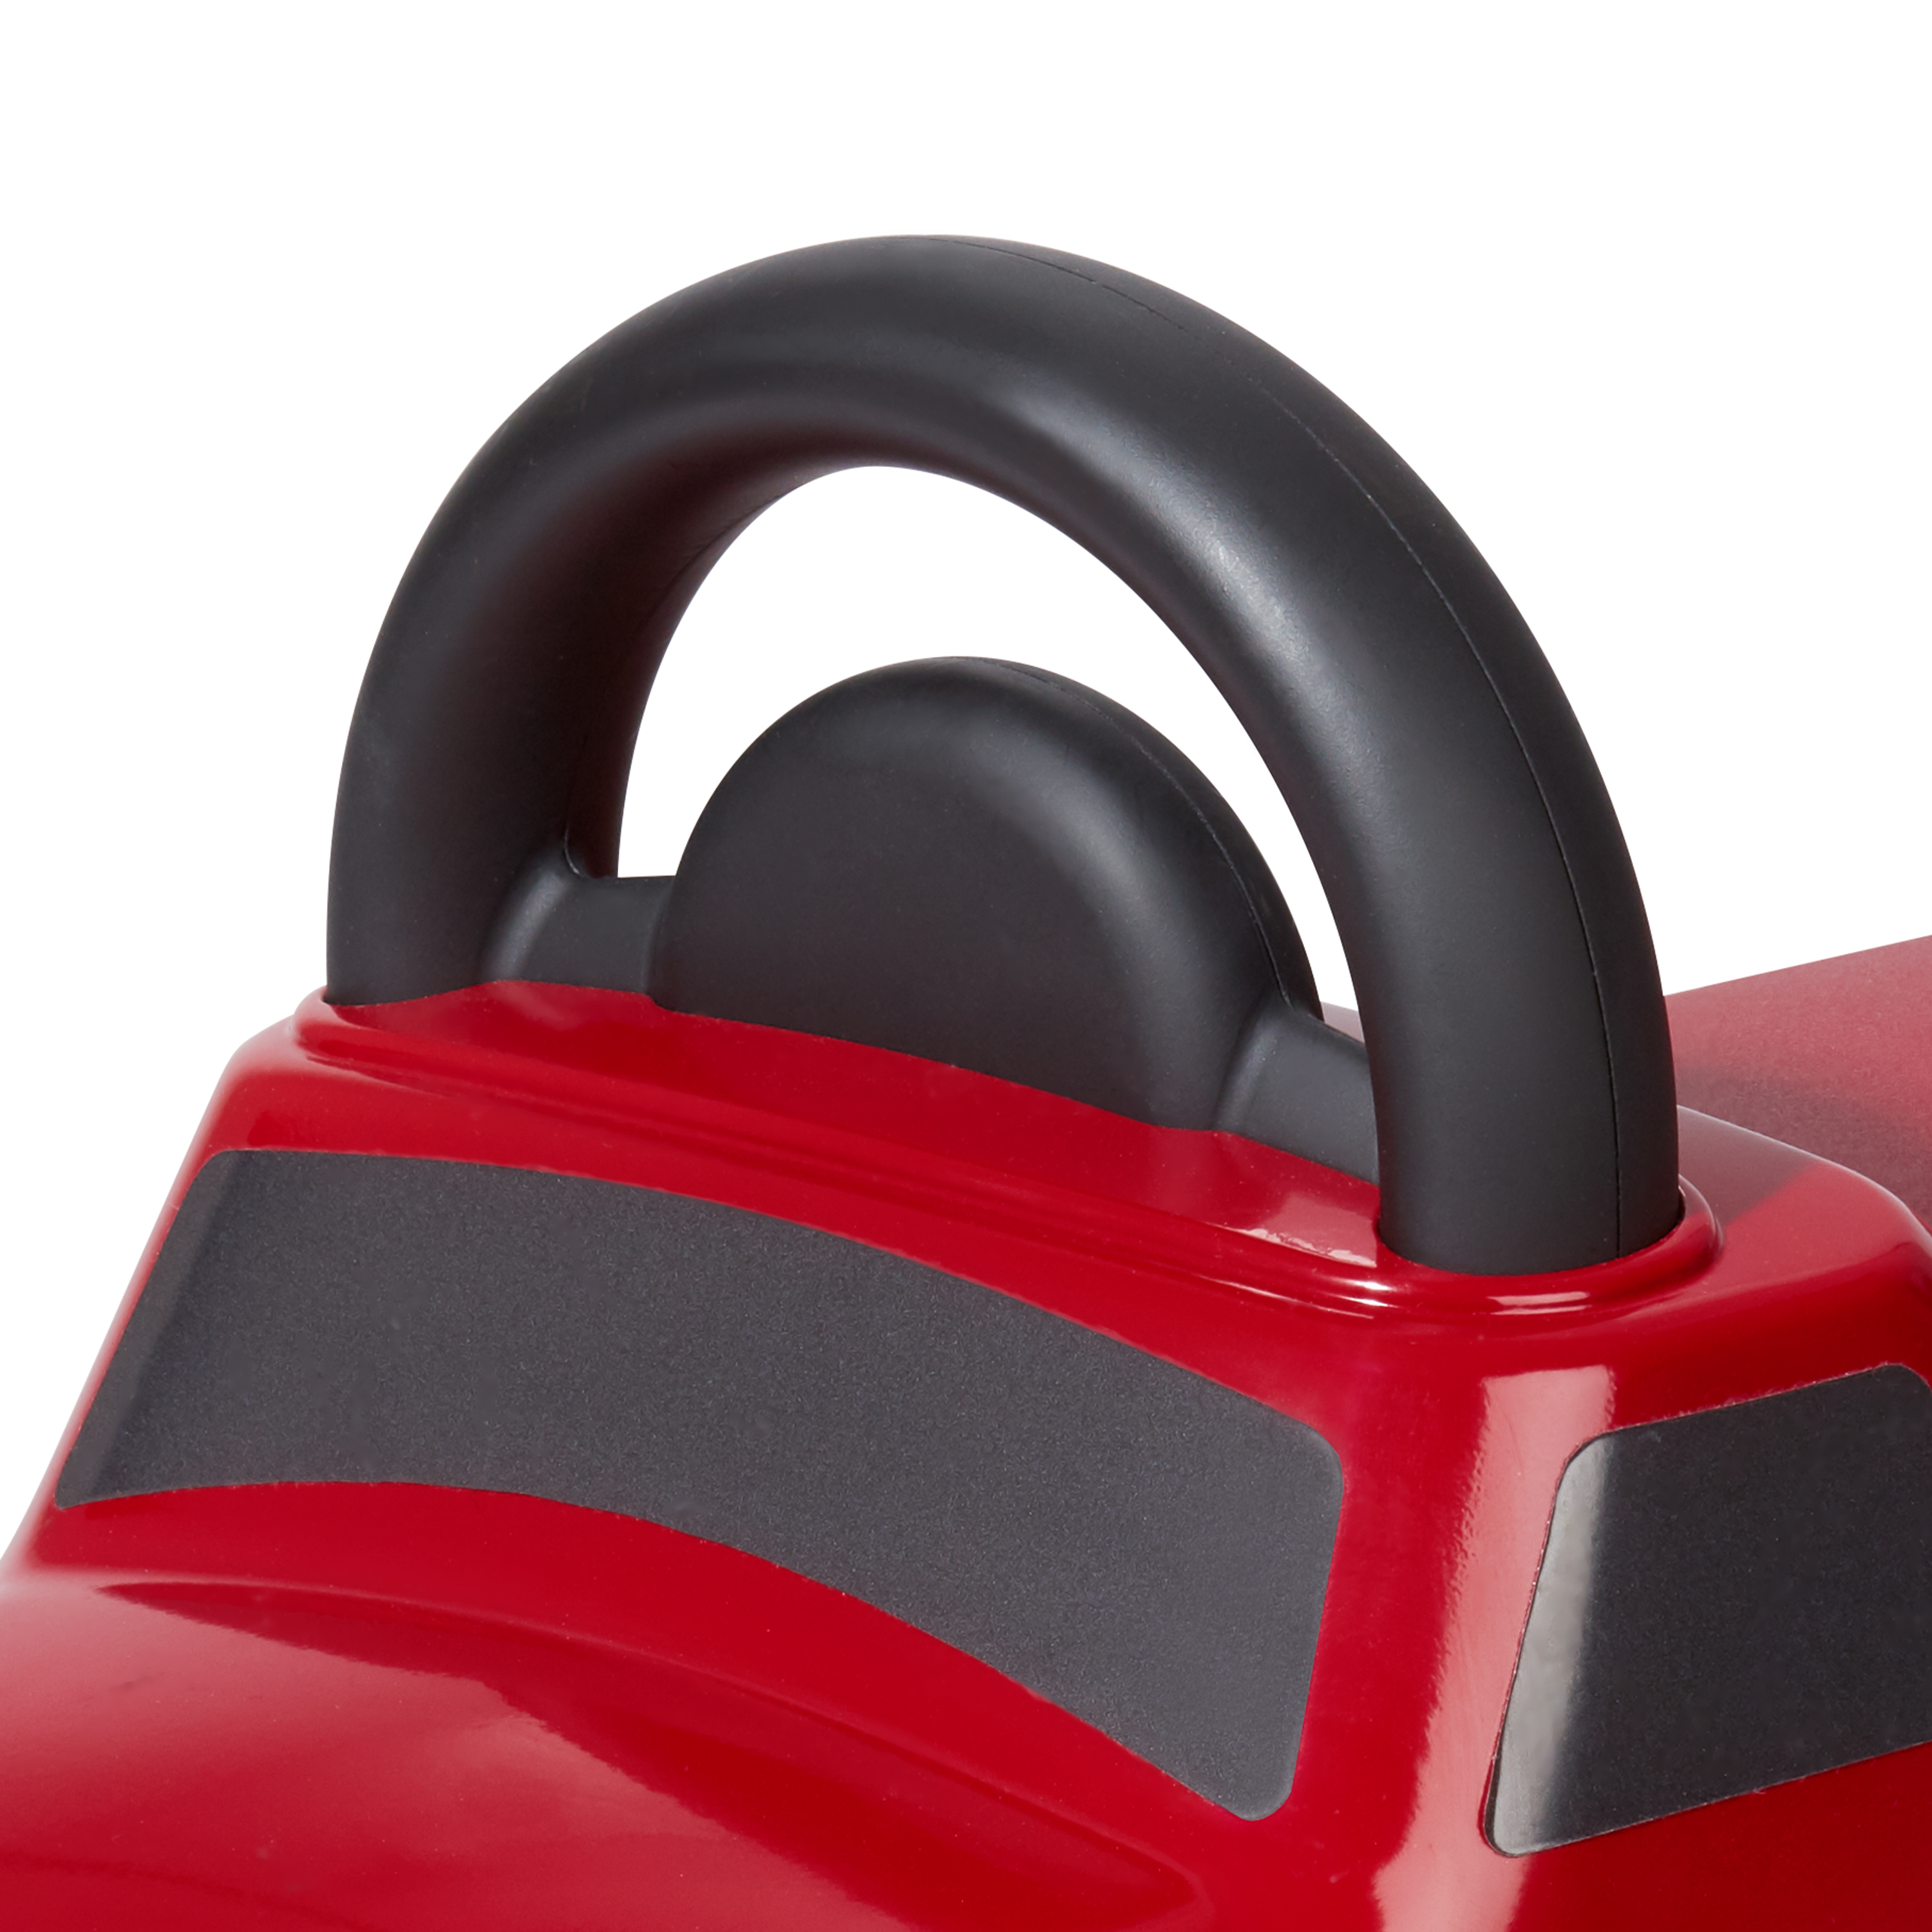 Radio Flyer, My 1st Race Car, Ride-on for Kids, Red, Kids 1-3 Years - image 2 of 7